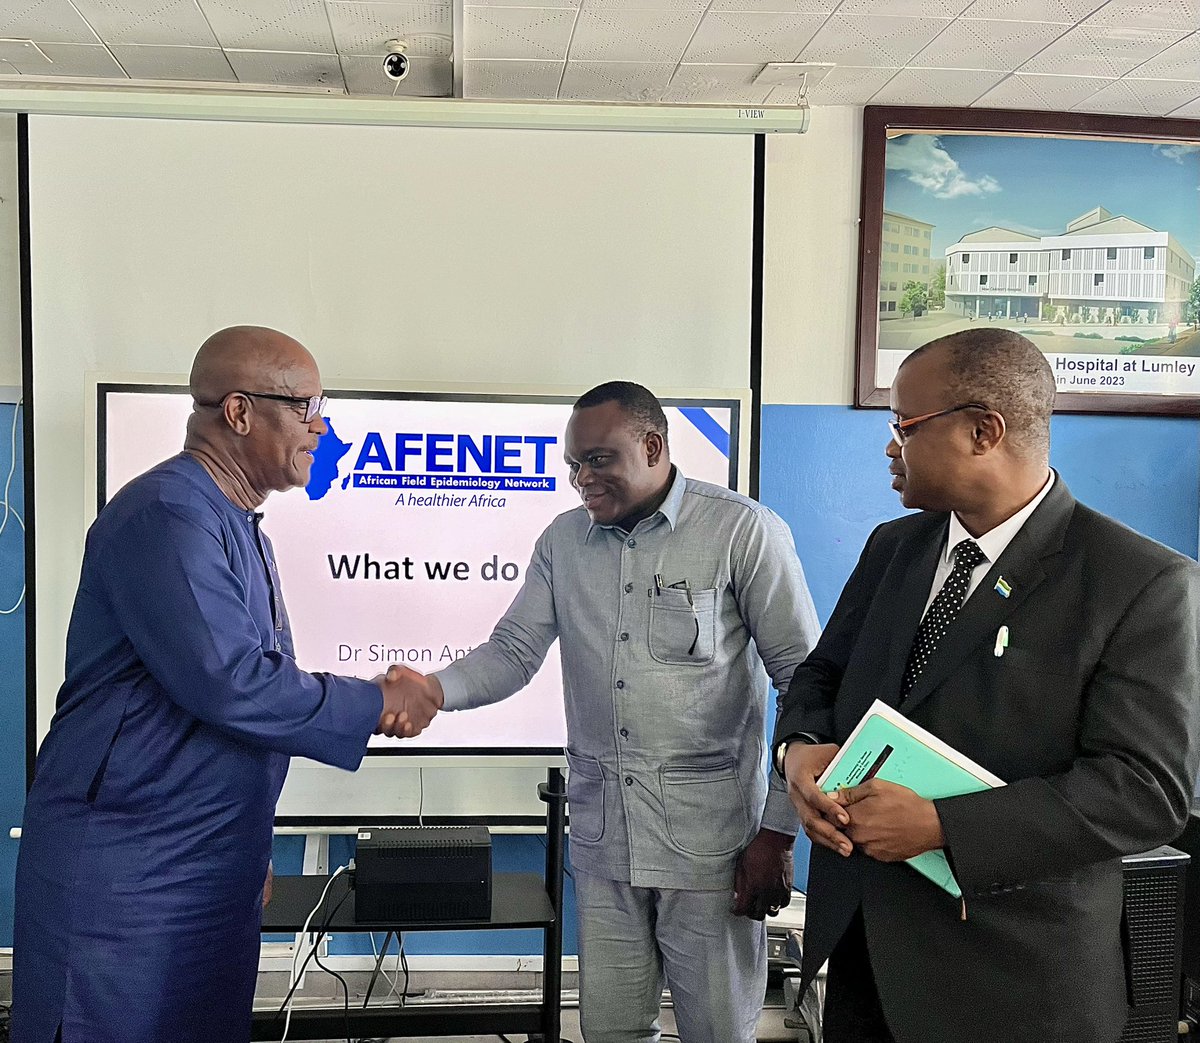 A really inspiring deliberation earlier today between #MoH @DembyAustin @CharlesSenessie and senior management team of @AFENETAfrica. Both parties discussed ways of strengthening collaboration and optimizing emergency response, workforce development & data management.